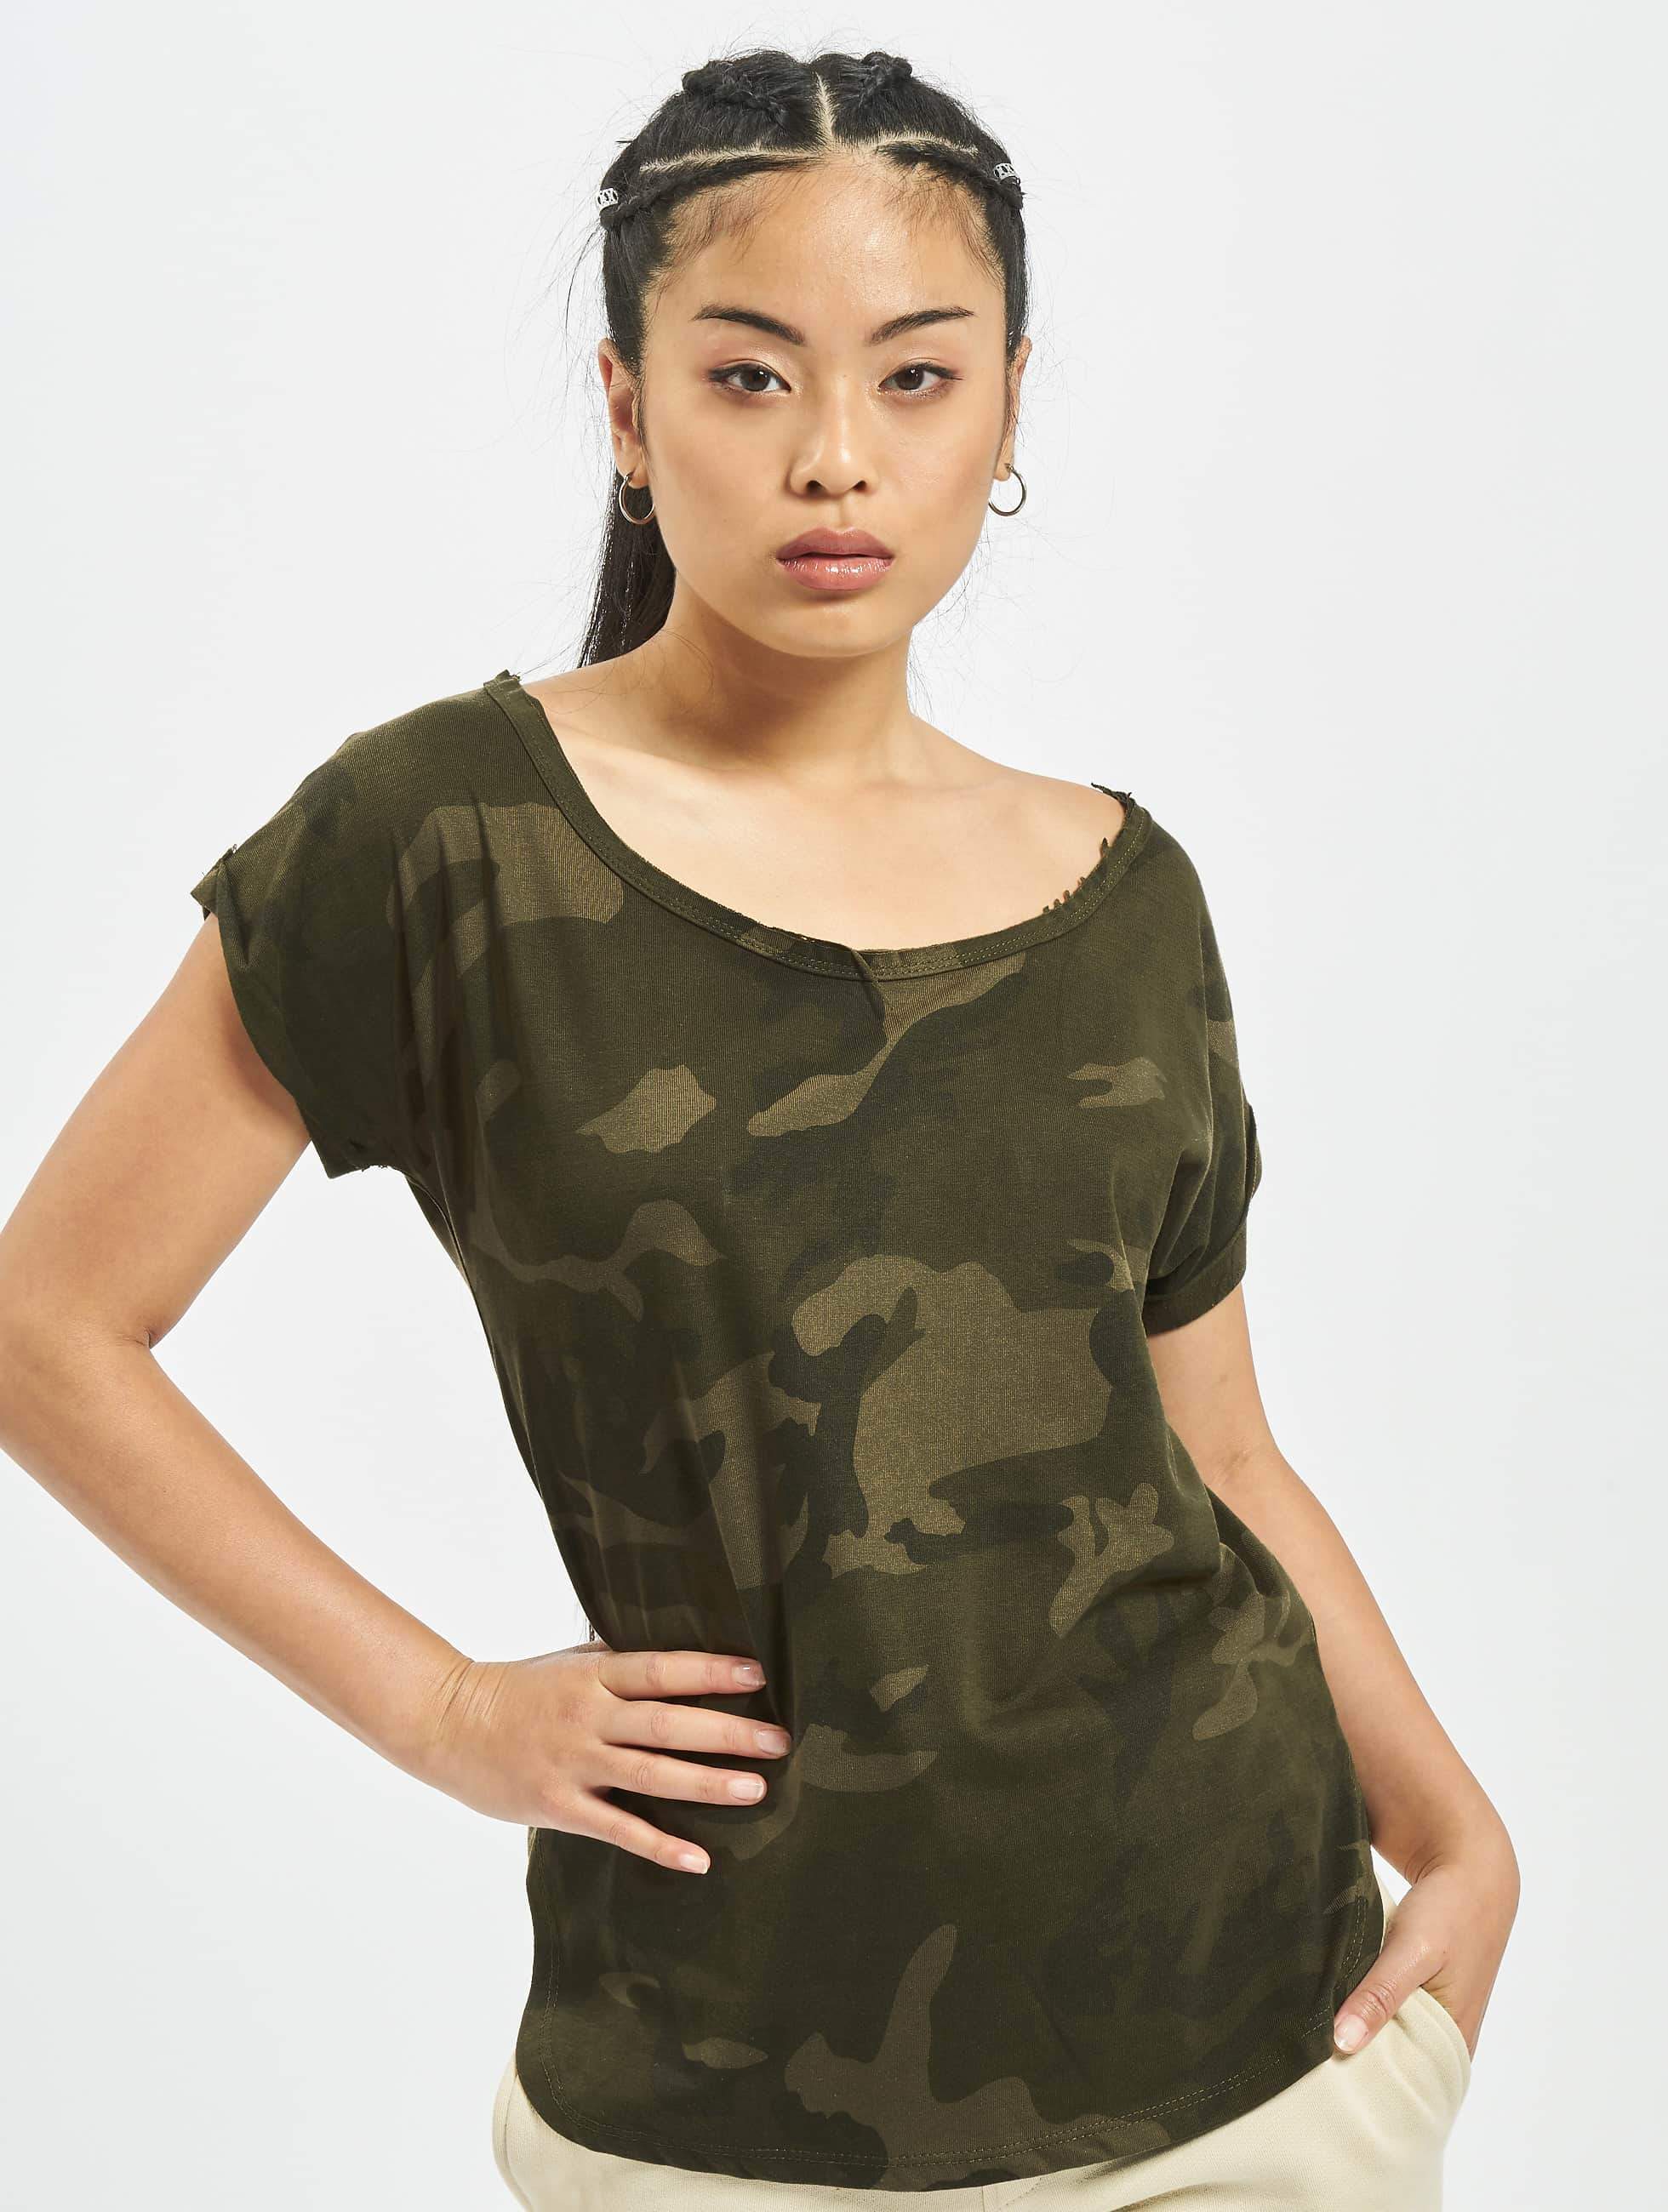 Conceit Picasso wildernis Urban Classics bovenstuk / t-shirt Camo Back Shaped in camouflage 494609